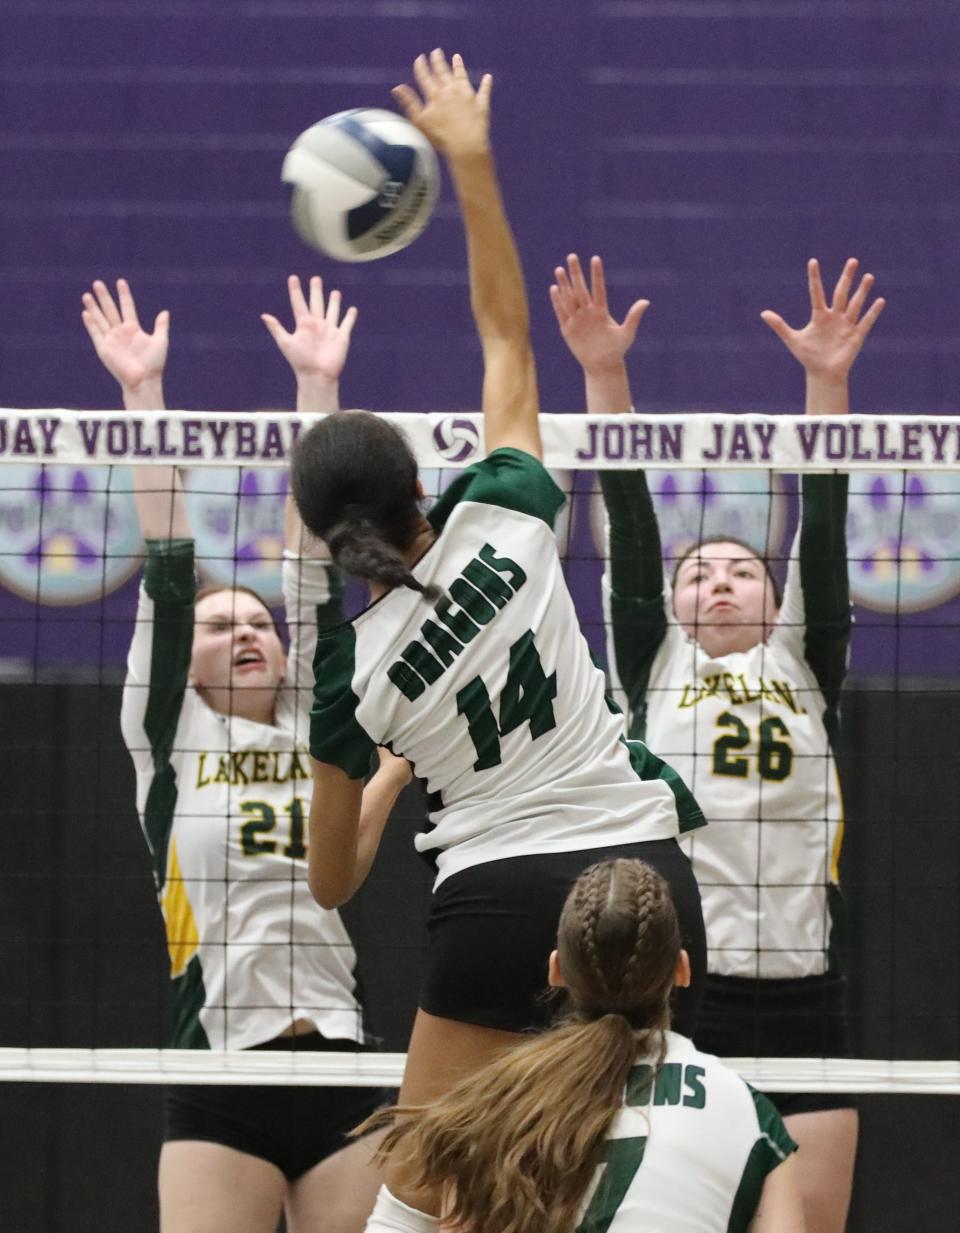 Lakeland's Eve Gallagher and Kayla Jennings defend a shot from Cornwall's Zakara Masibo during the Lakeland vs Cornwall Class A girls volleyball regional final at John Jay High School in Cross River, Nov. 11, 2022.